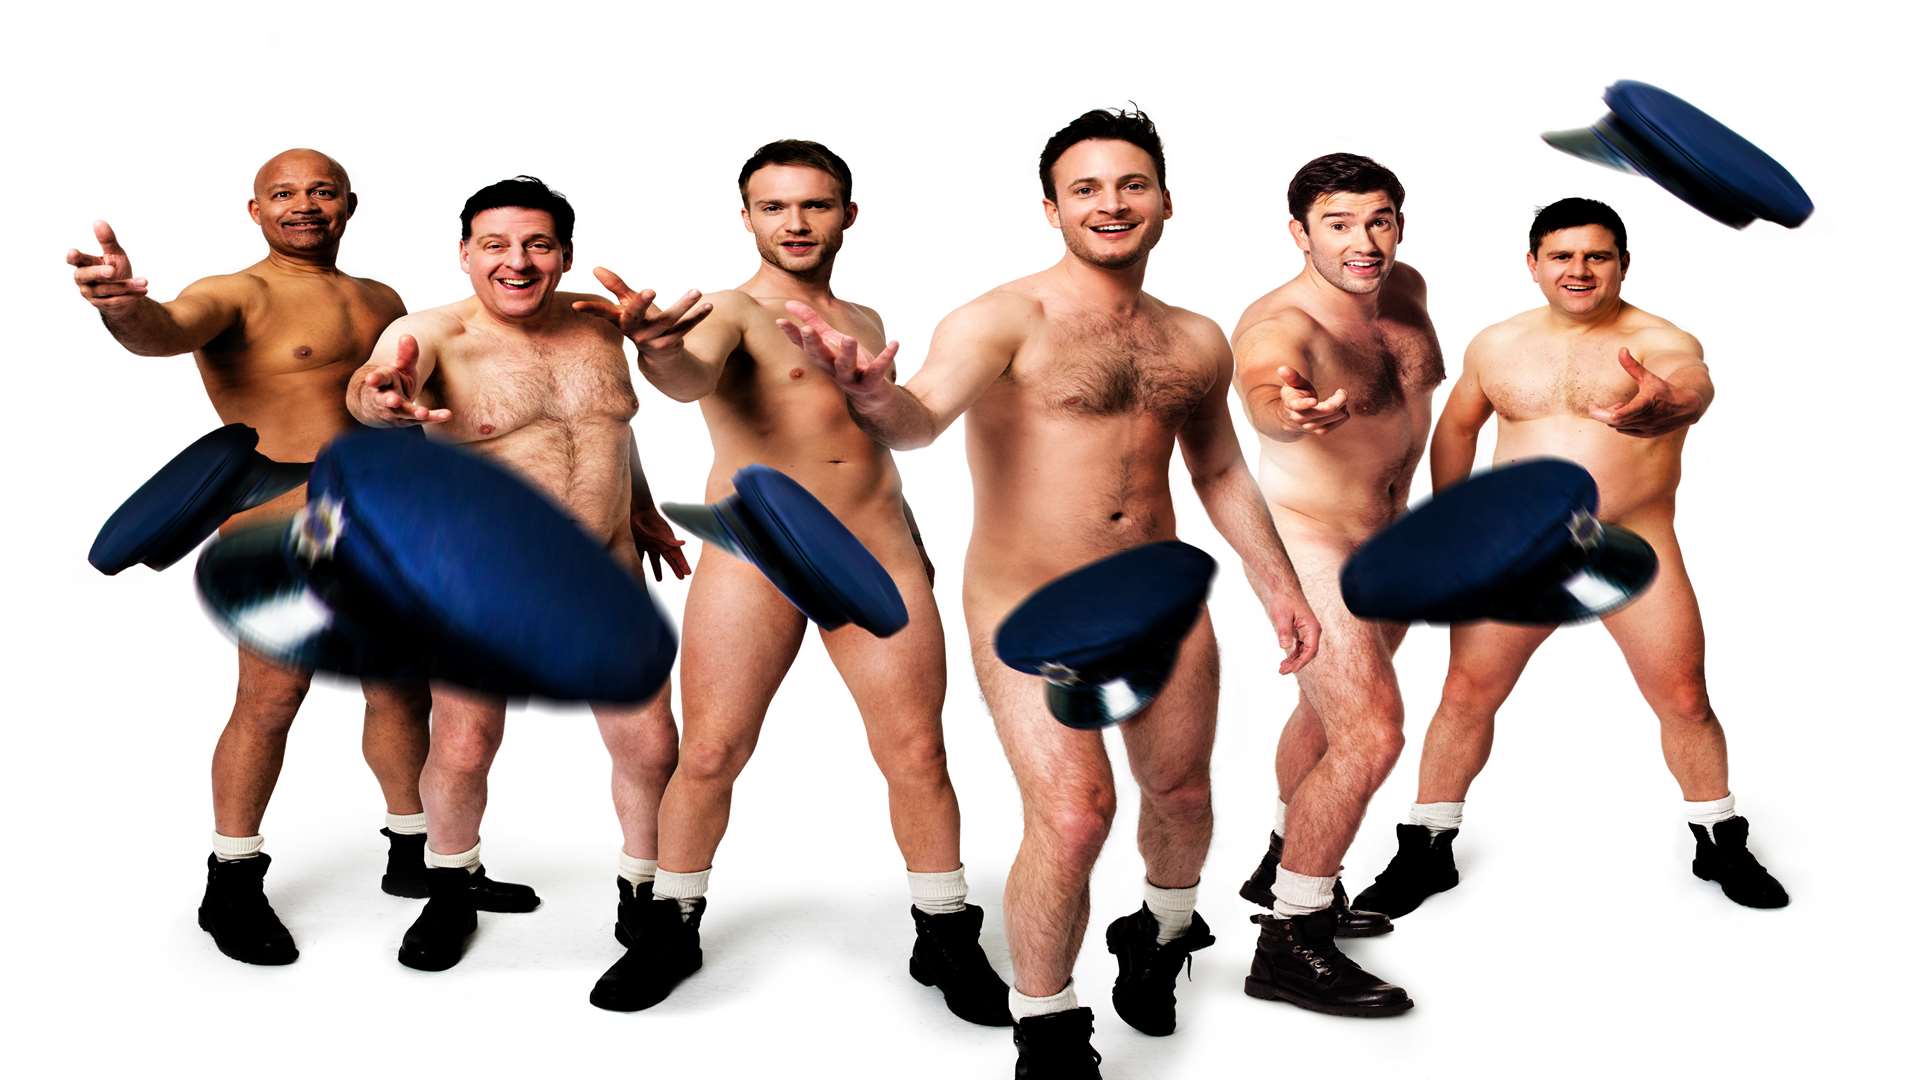 The Full Monty boys are coming to Dartford and Canterbury